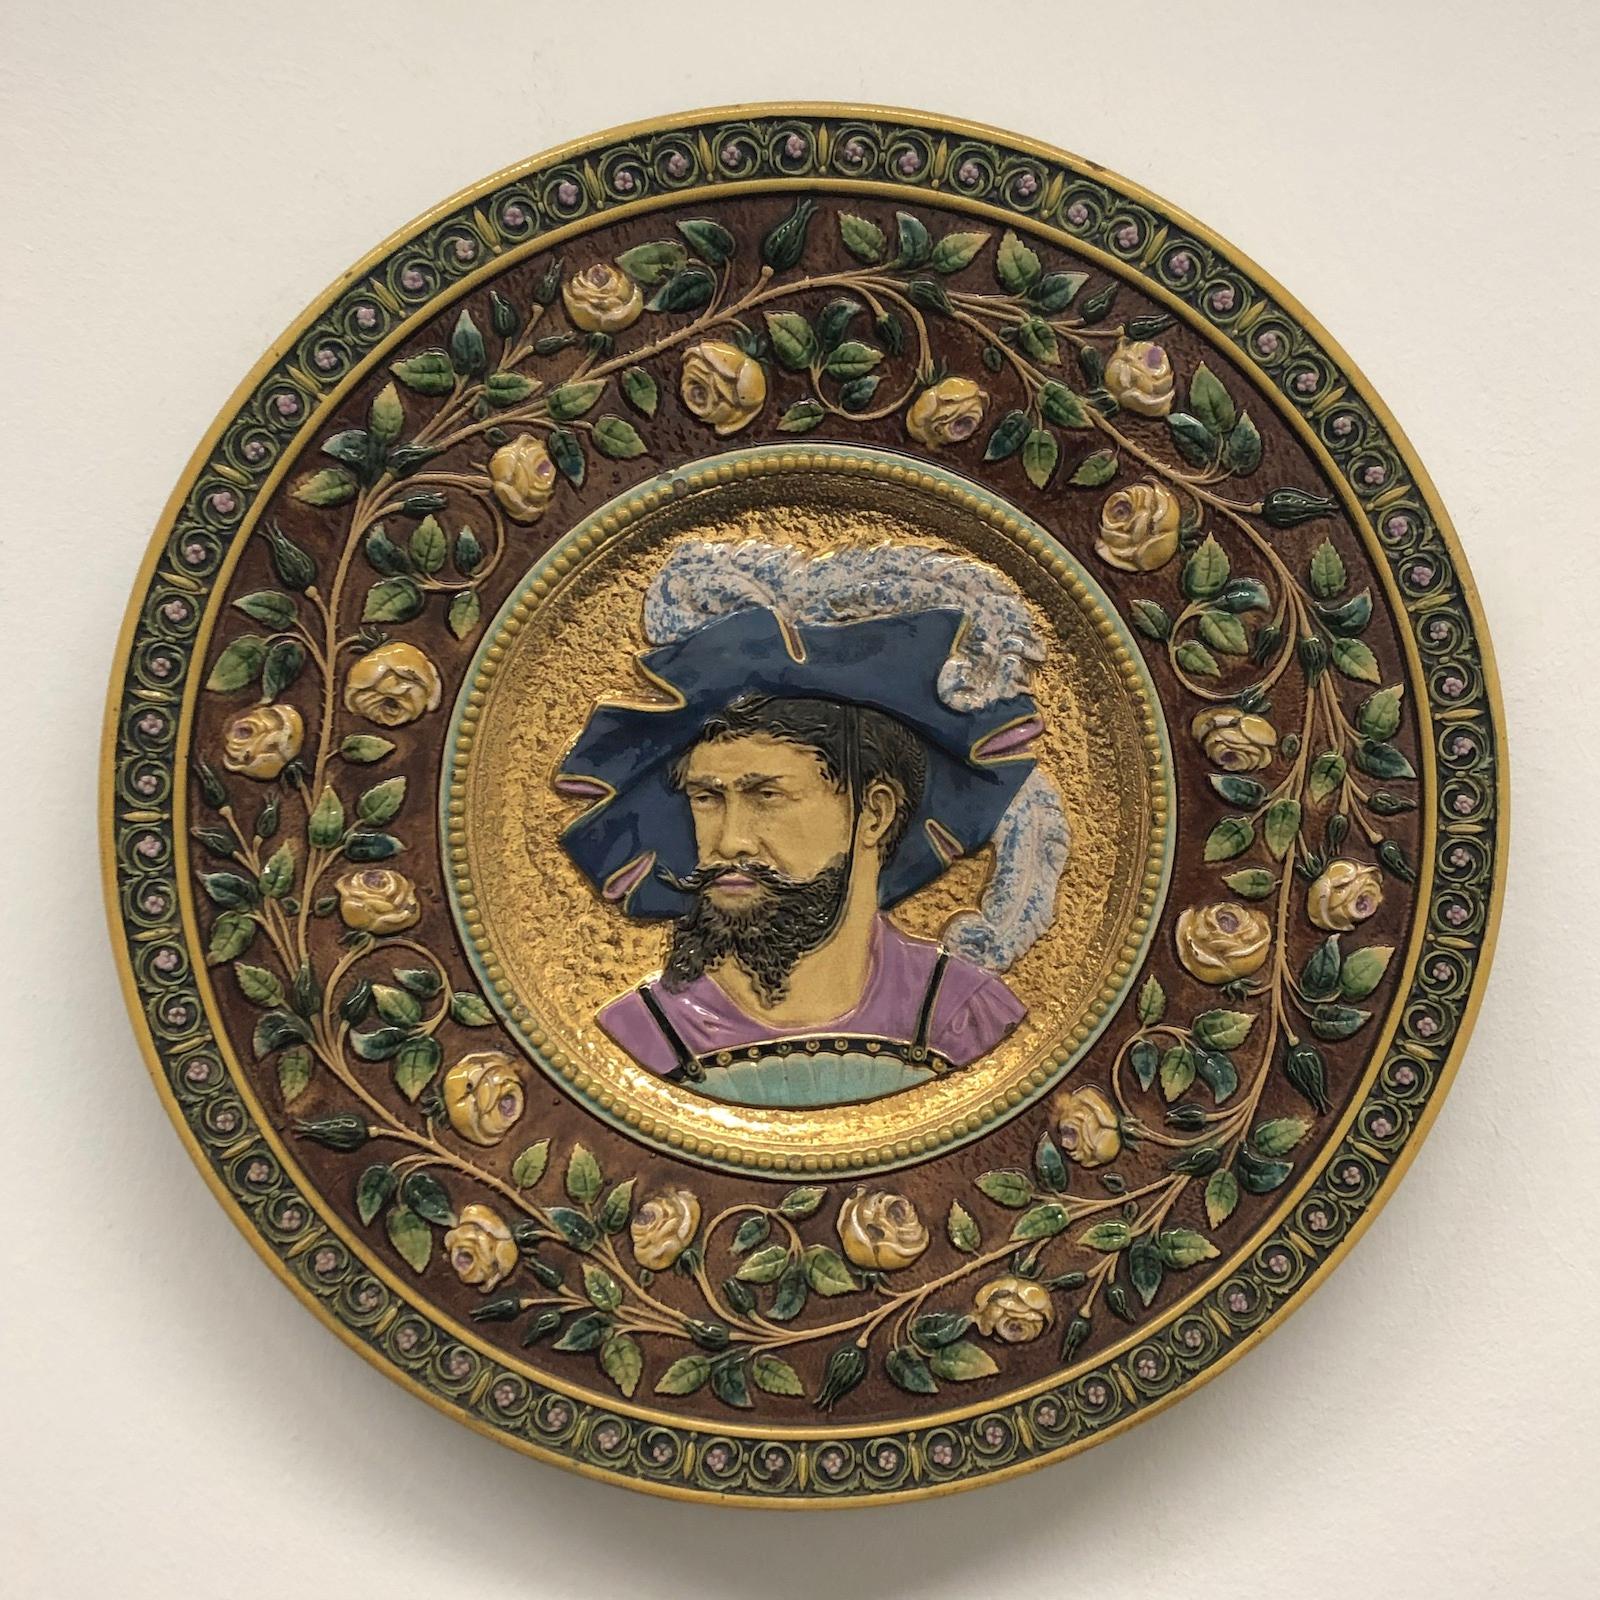 A large german majolica plate, circa 1880-1890s. The plate represent a german nobleman on a gold plated background surrounded by flowers.
Made by an unknown artist, it is not signed. With signs of wear as expected with age and use. 2 small chips